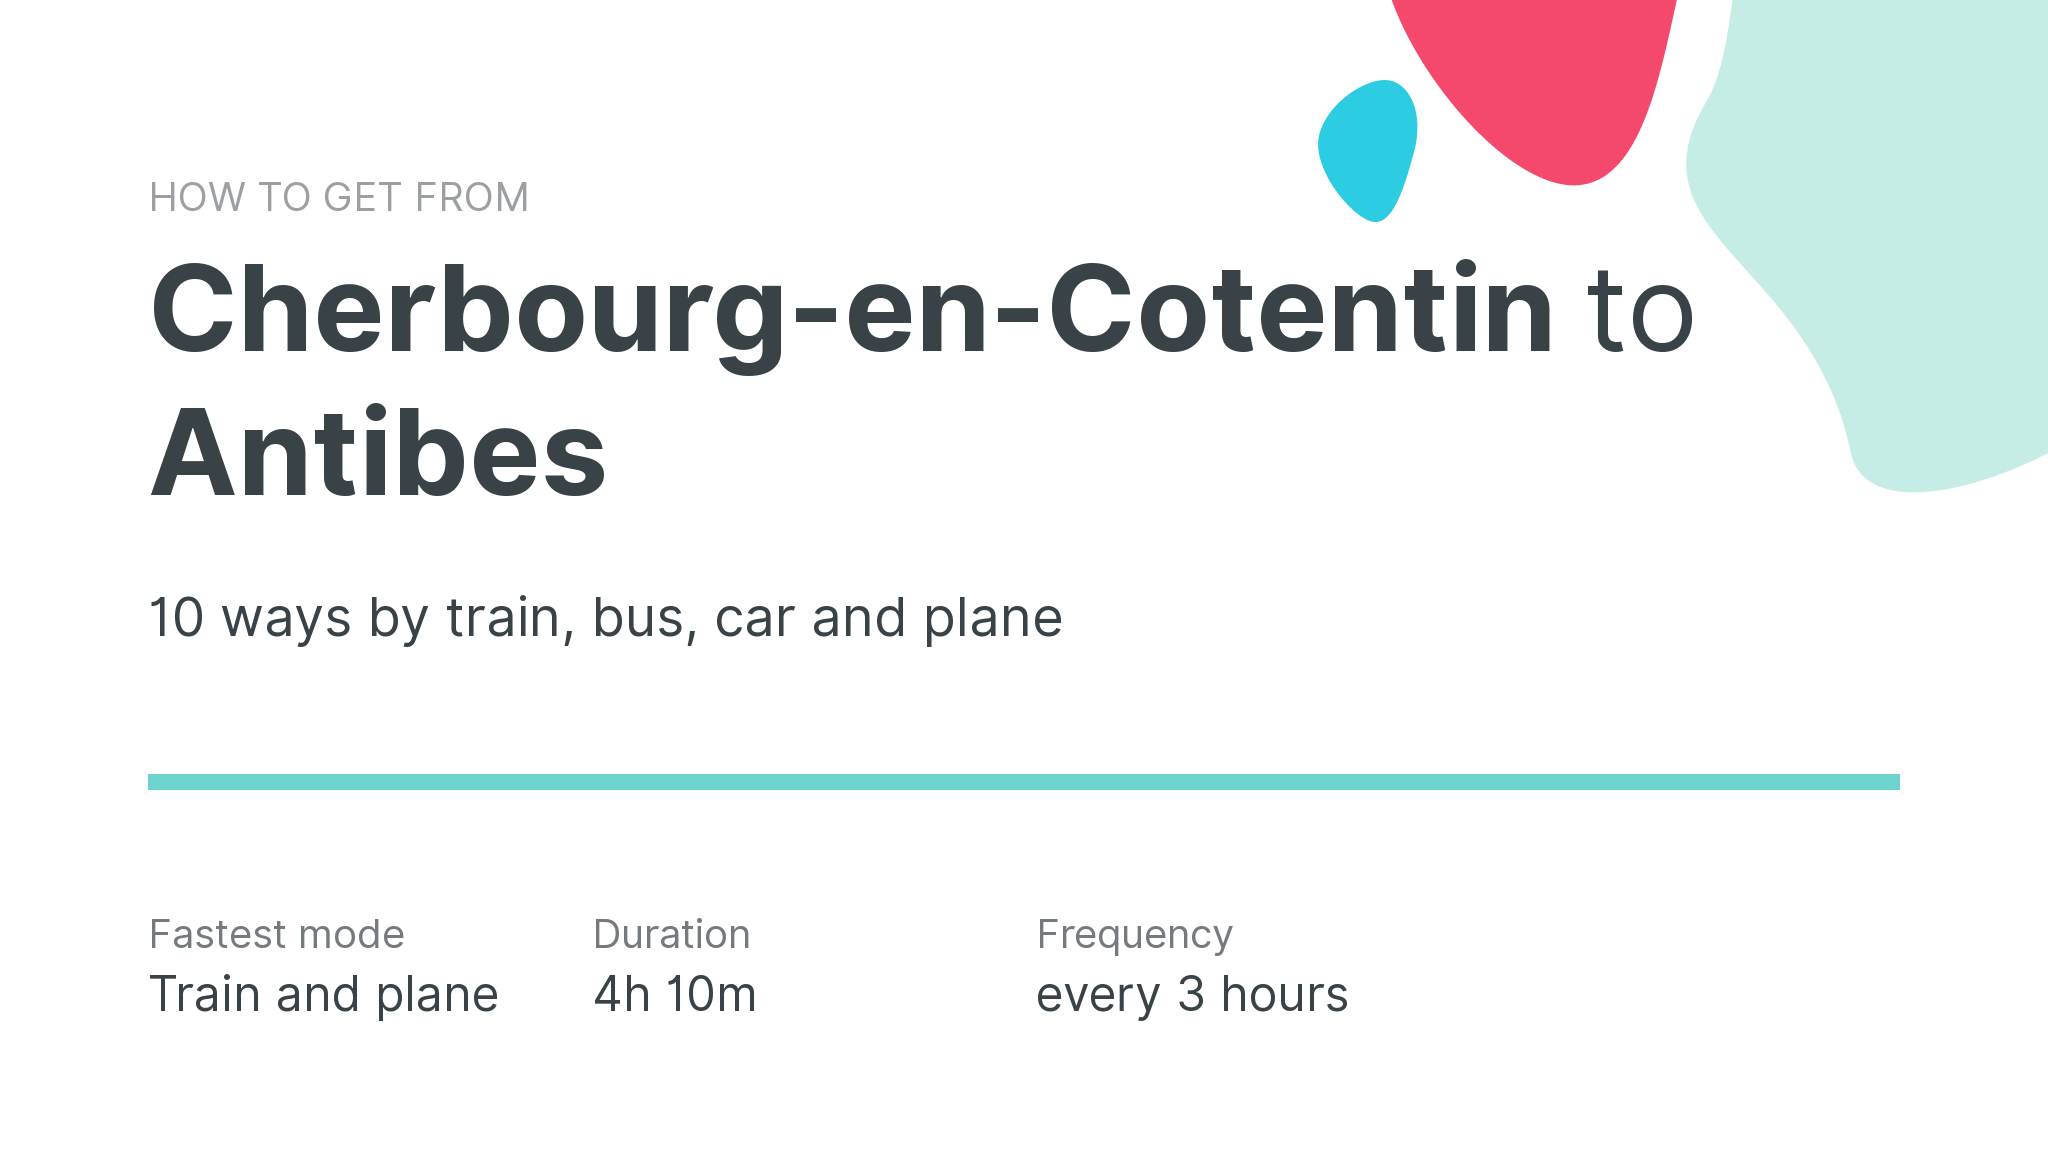 How do I get from Cherbourg-en-Cotentin to Antibes